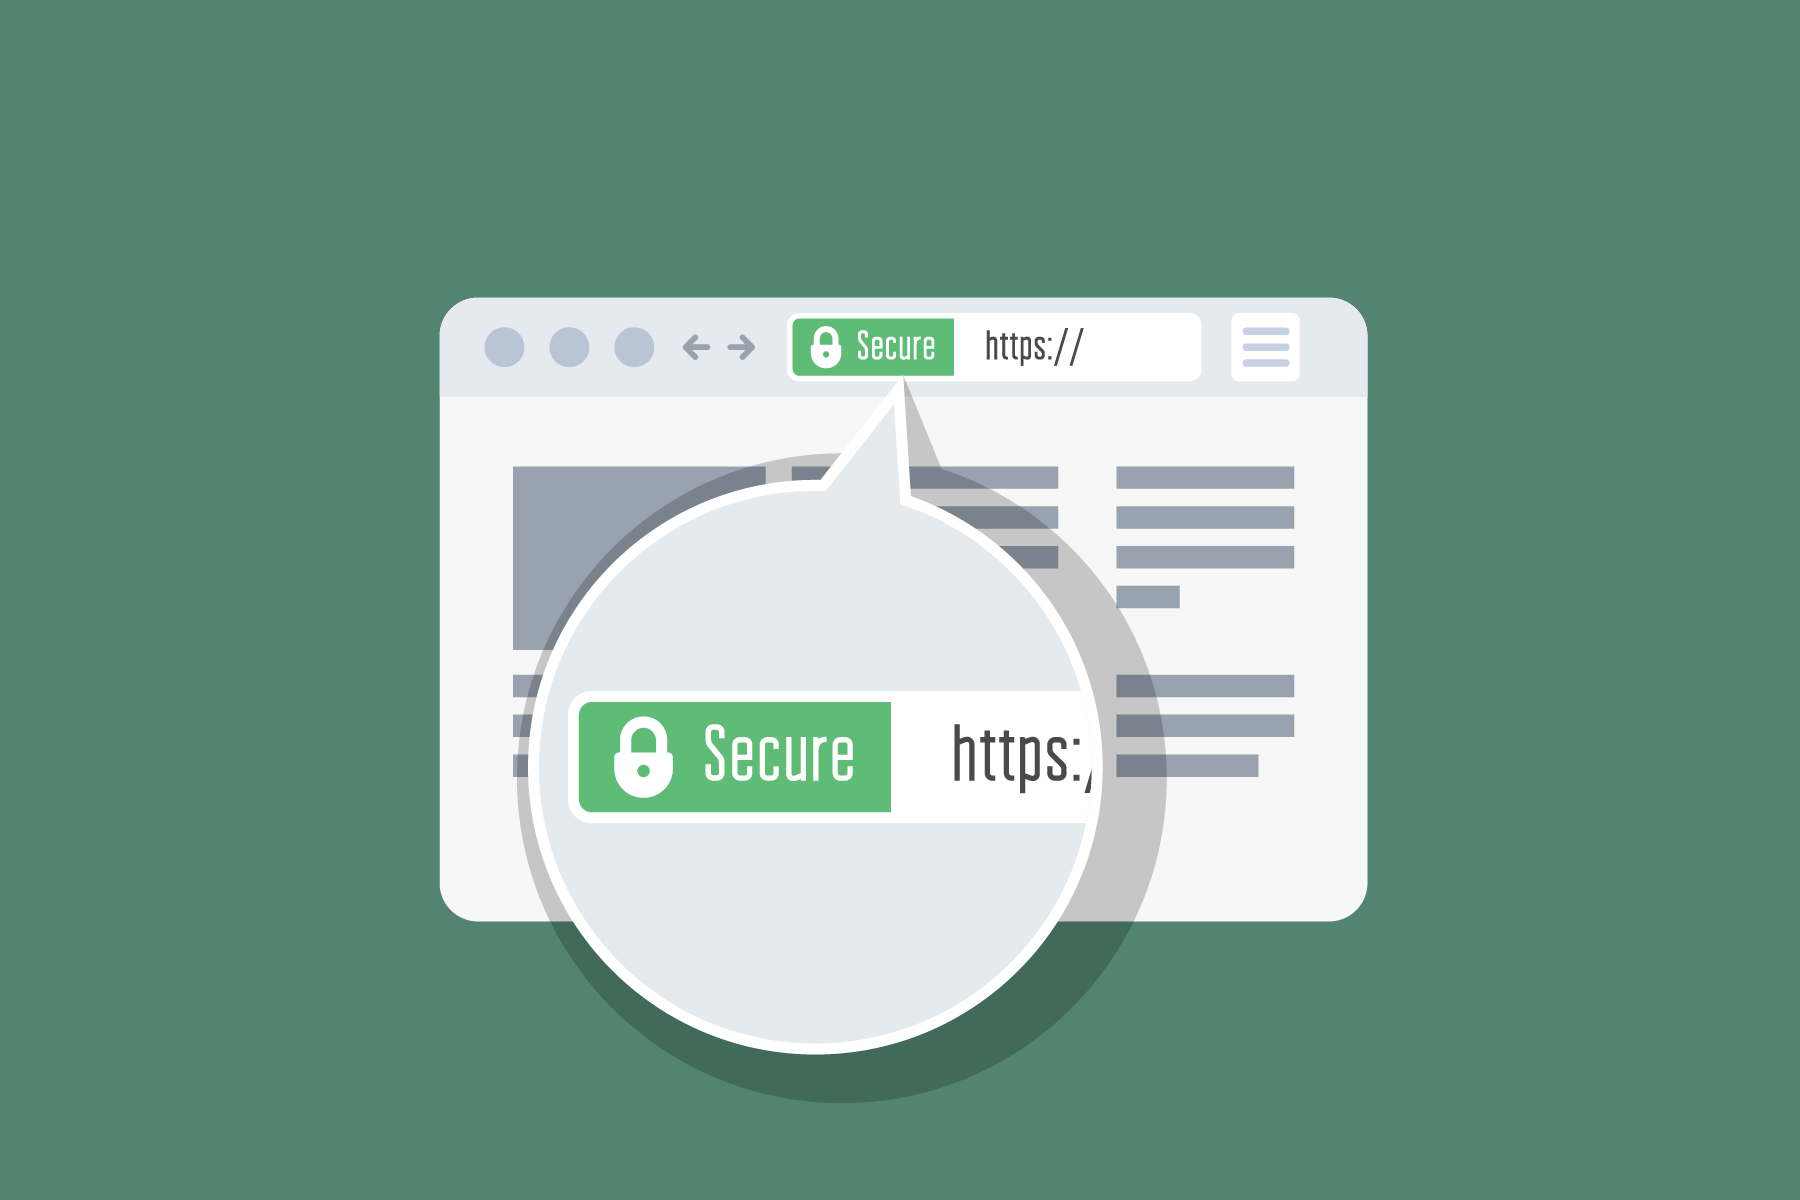 No need to buy SSL certificates – they’re free!